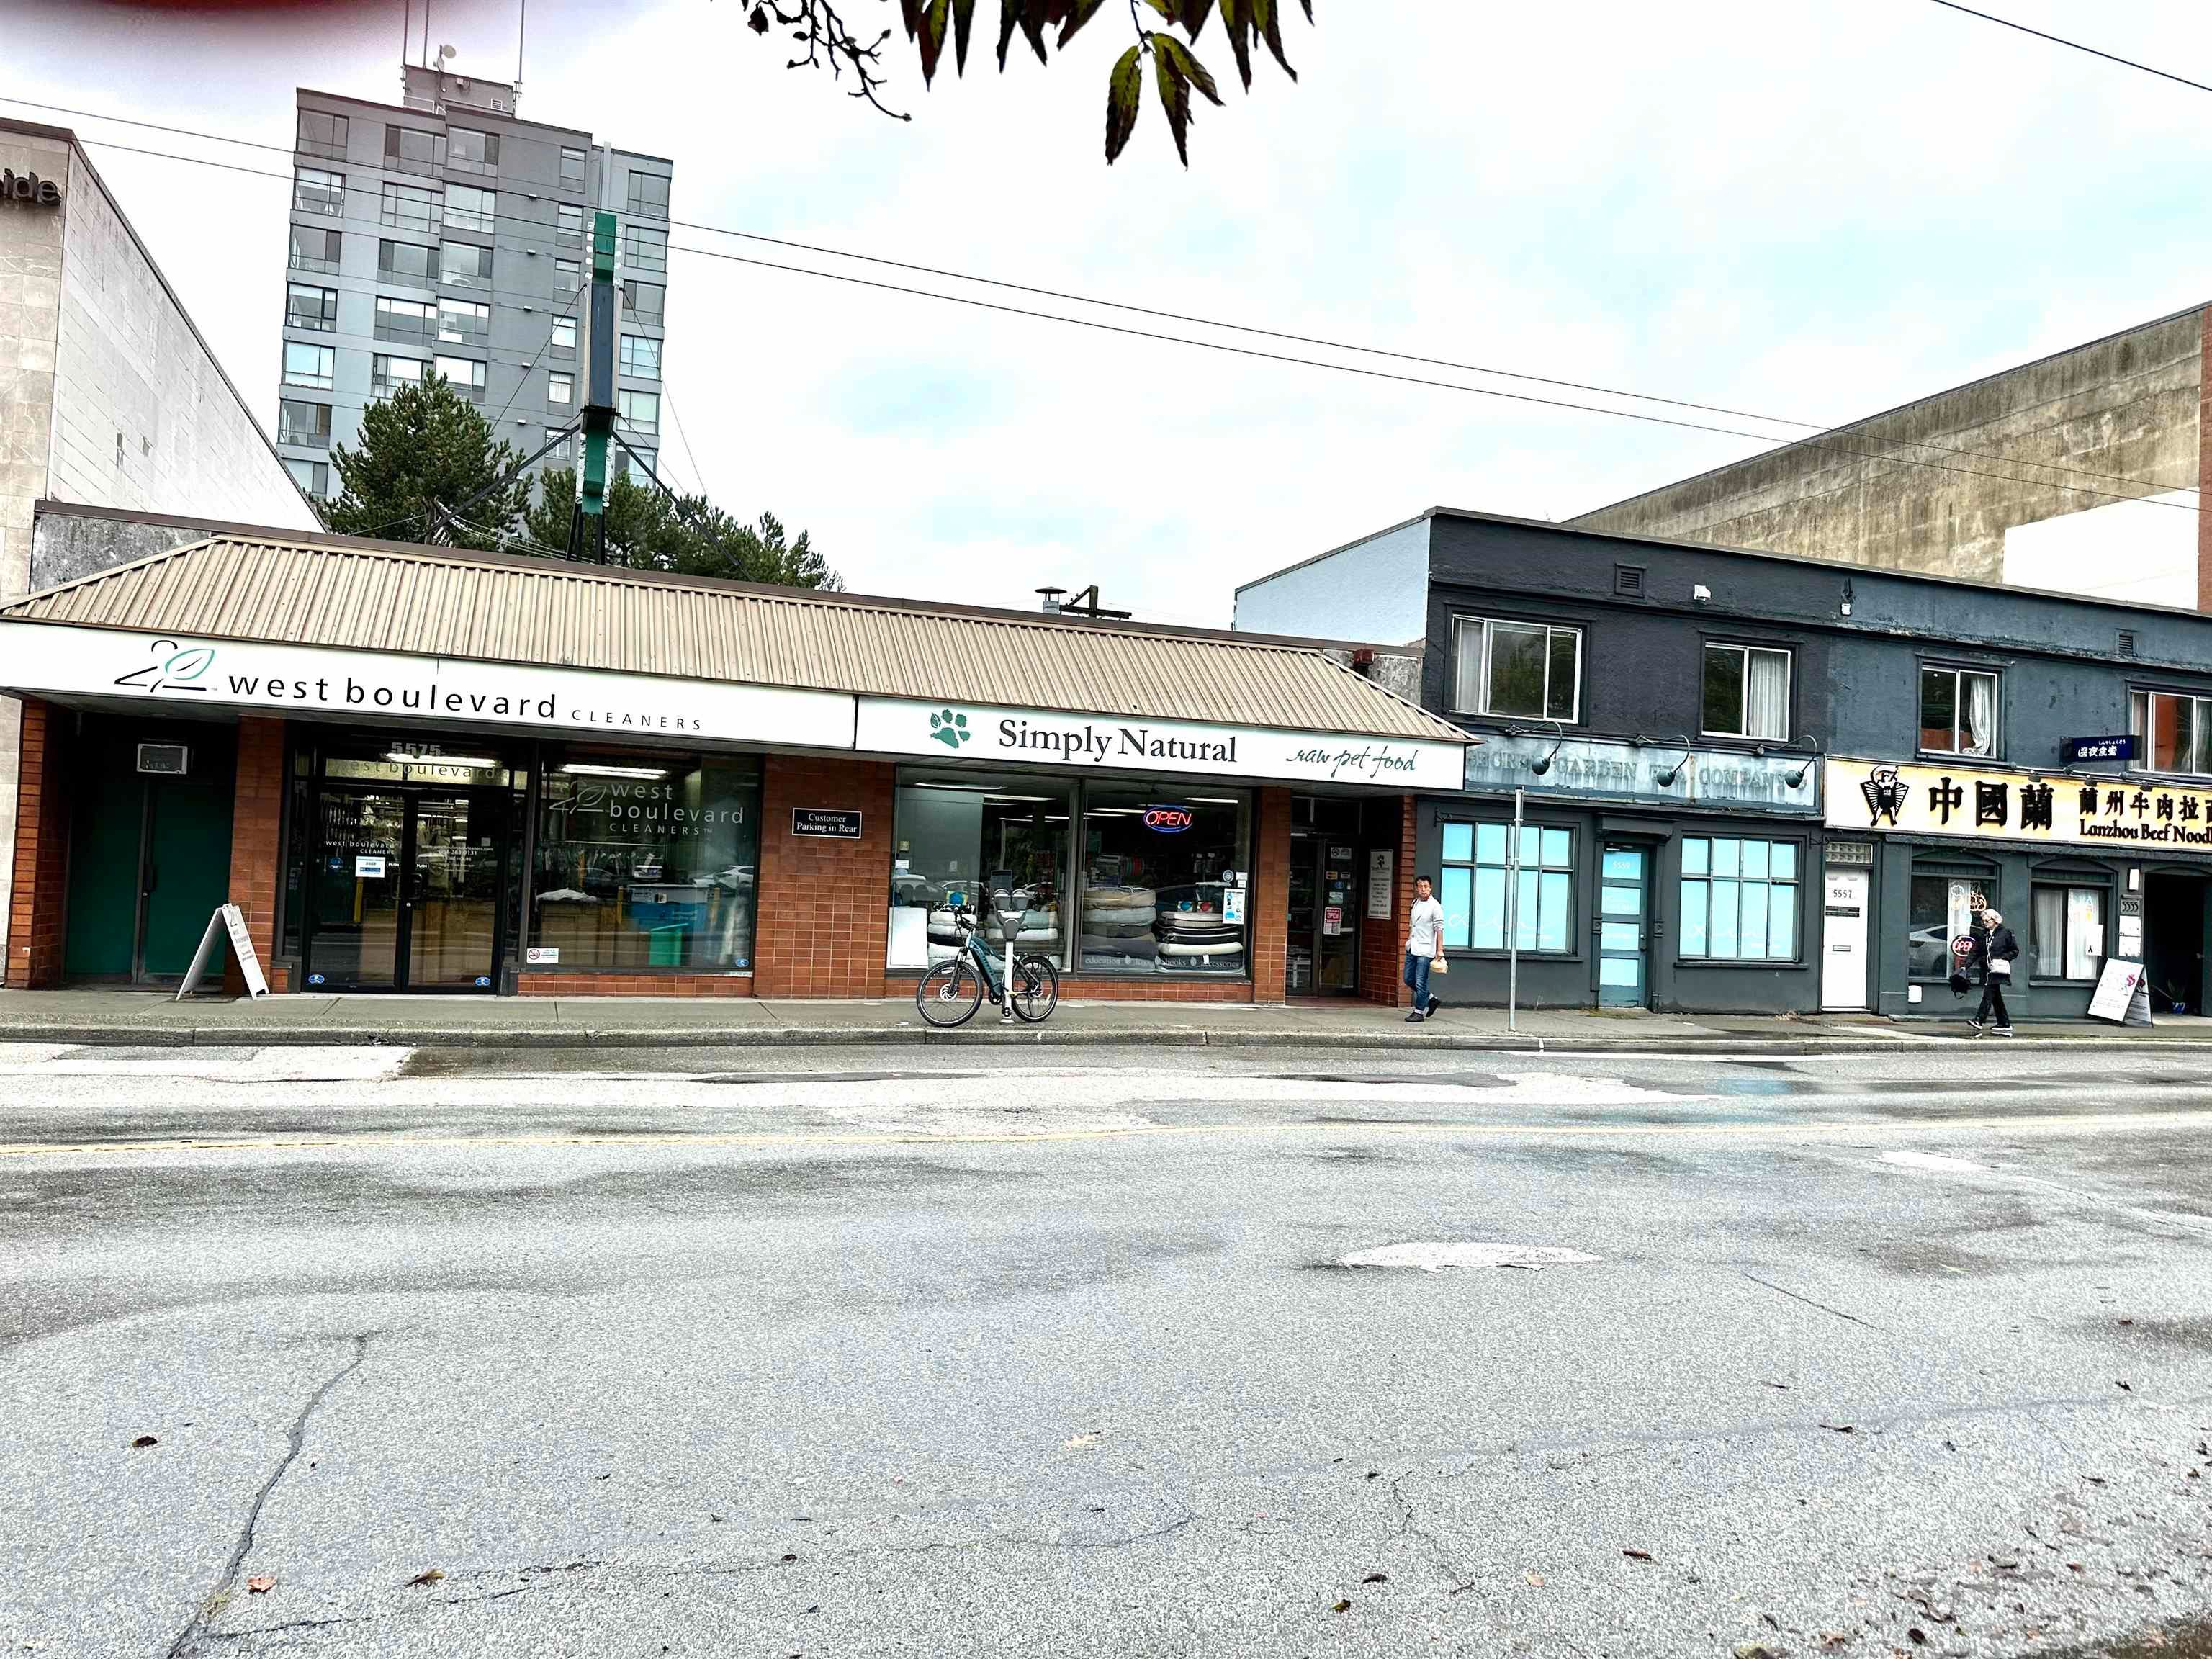 Main Photo: 5555 & 5565 W BOULEVARD in Vancouver: Kerrisdale Retail for sale (Vancouver West)  : MLS®# C8054597